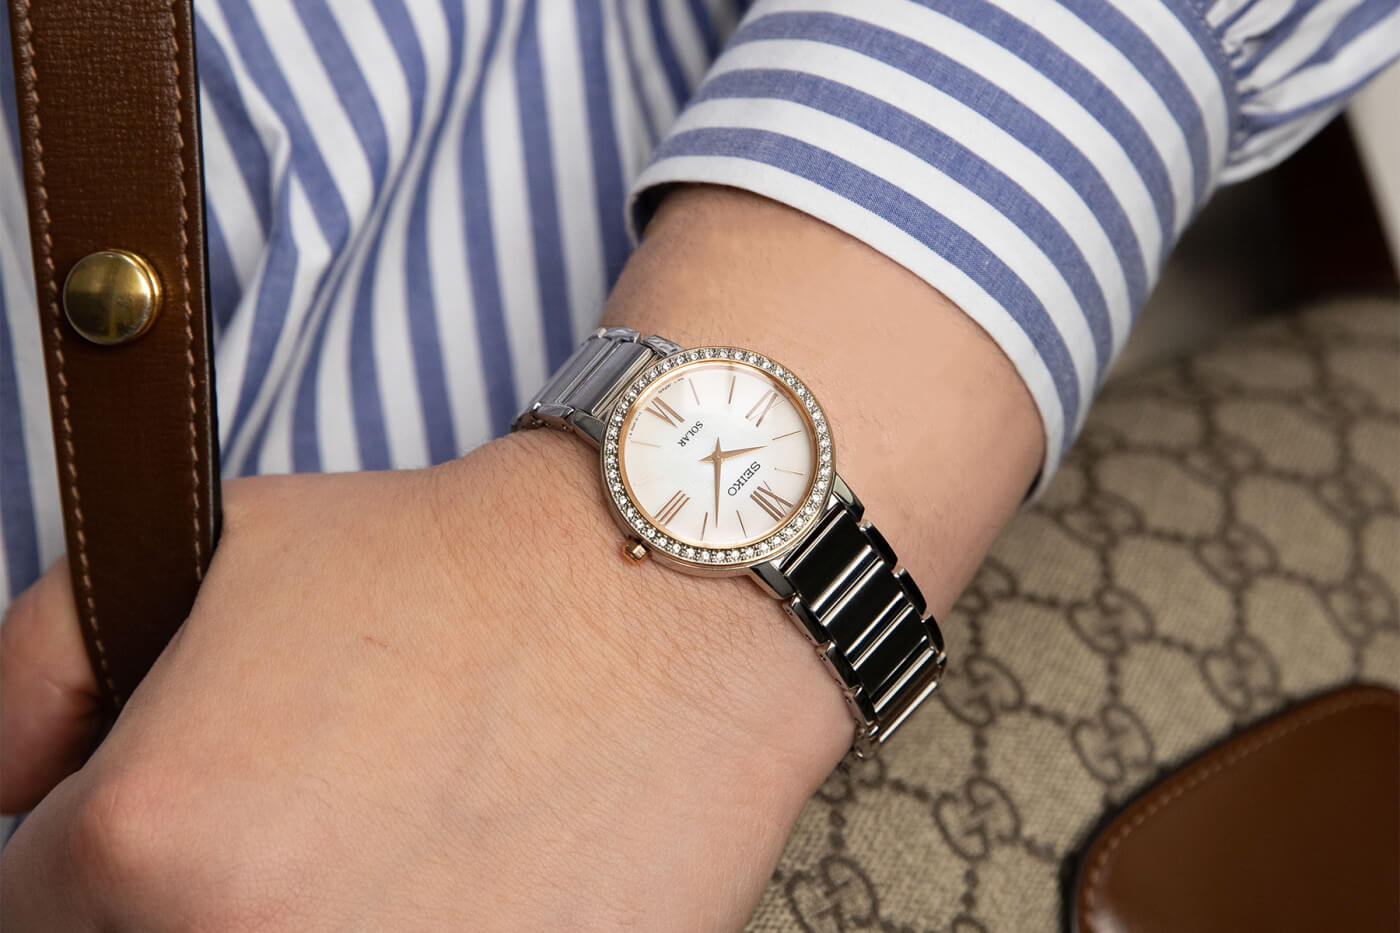 Can A Woman Wear A Men's Watch? We Investigate